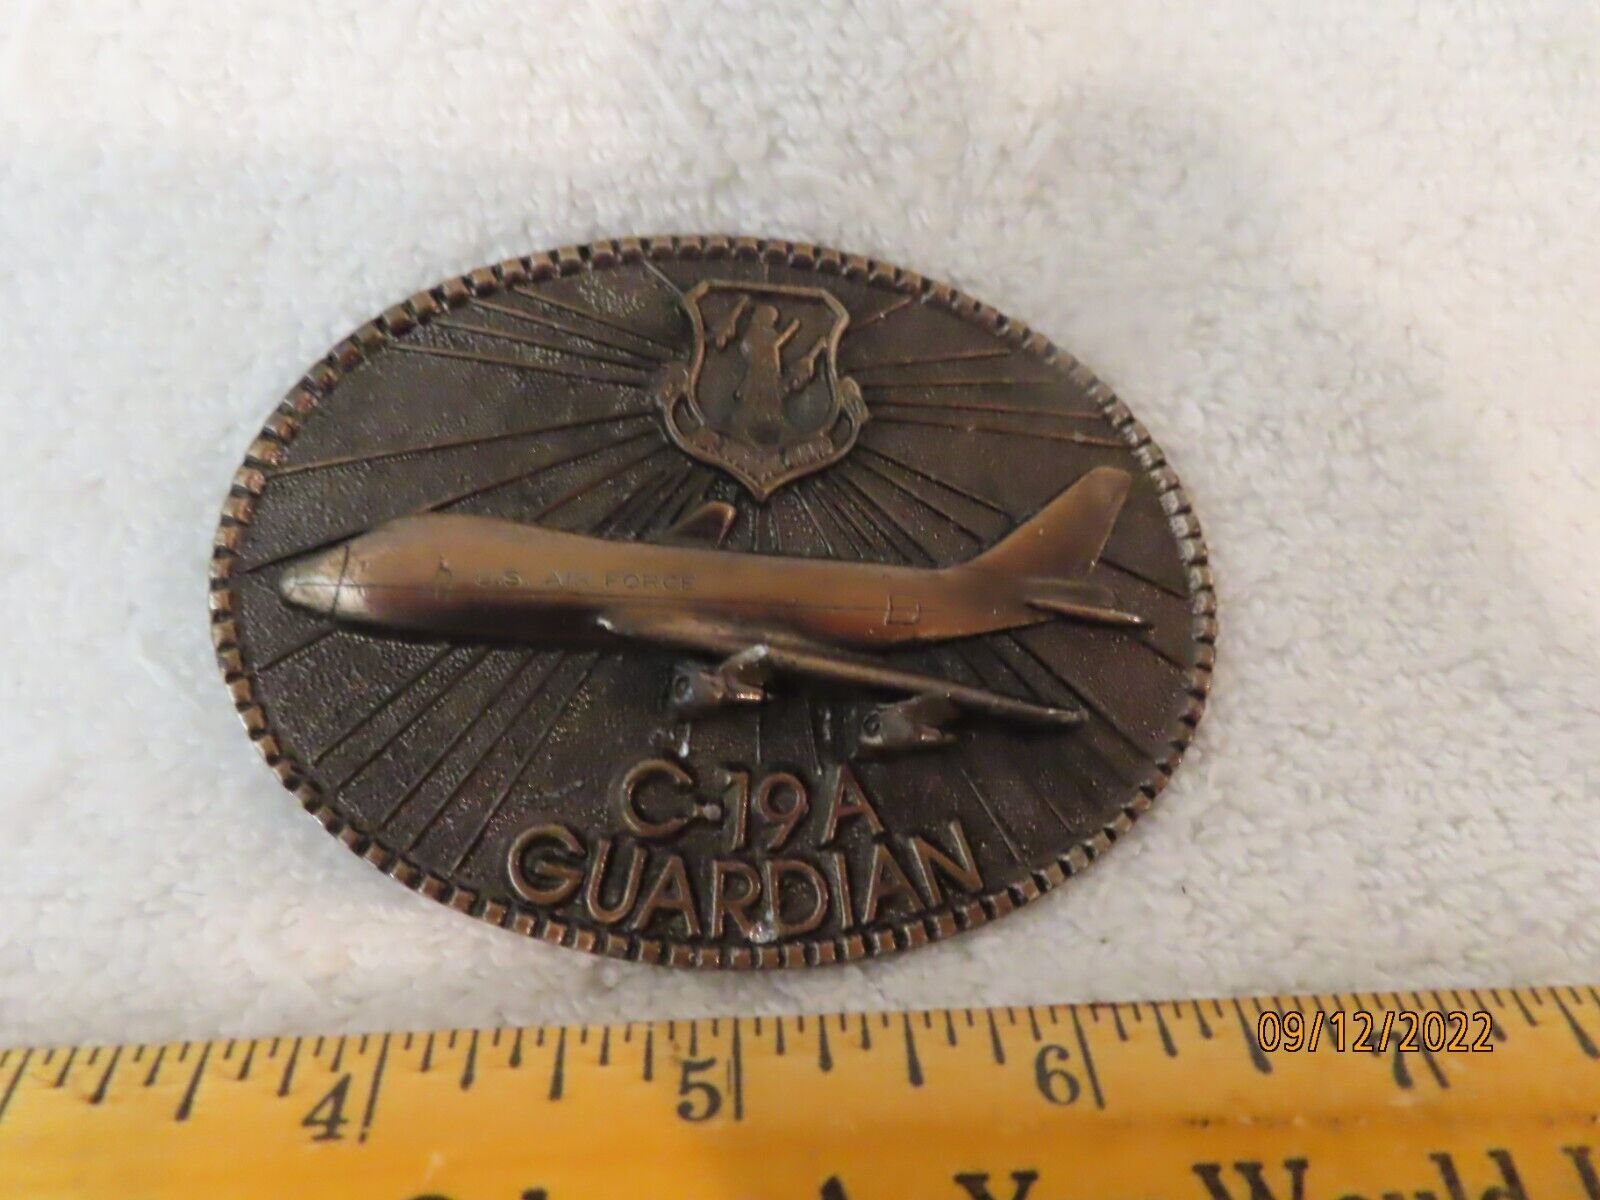 Vintage United States Air National Guard C-19A Guardian Brass Belt Buckle